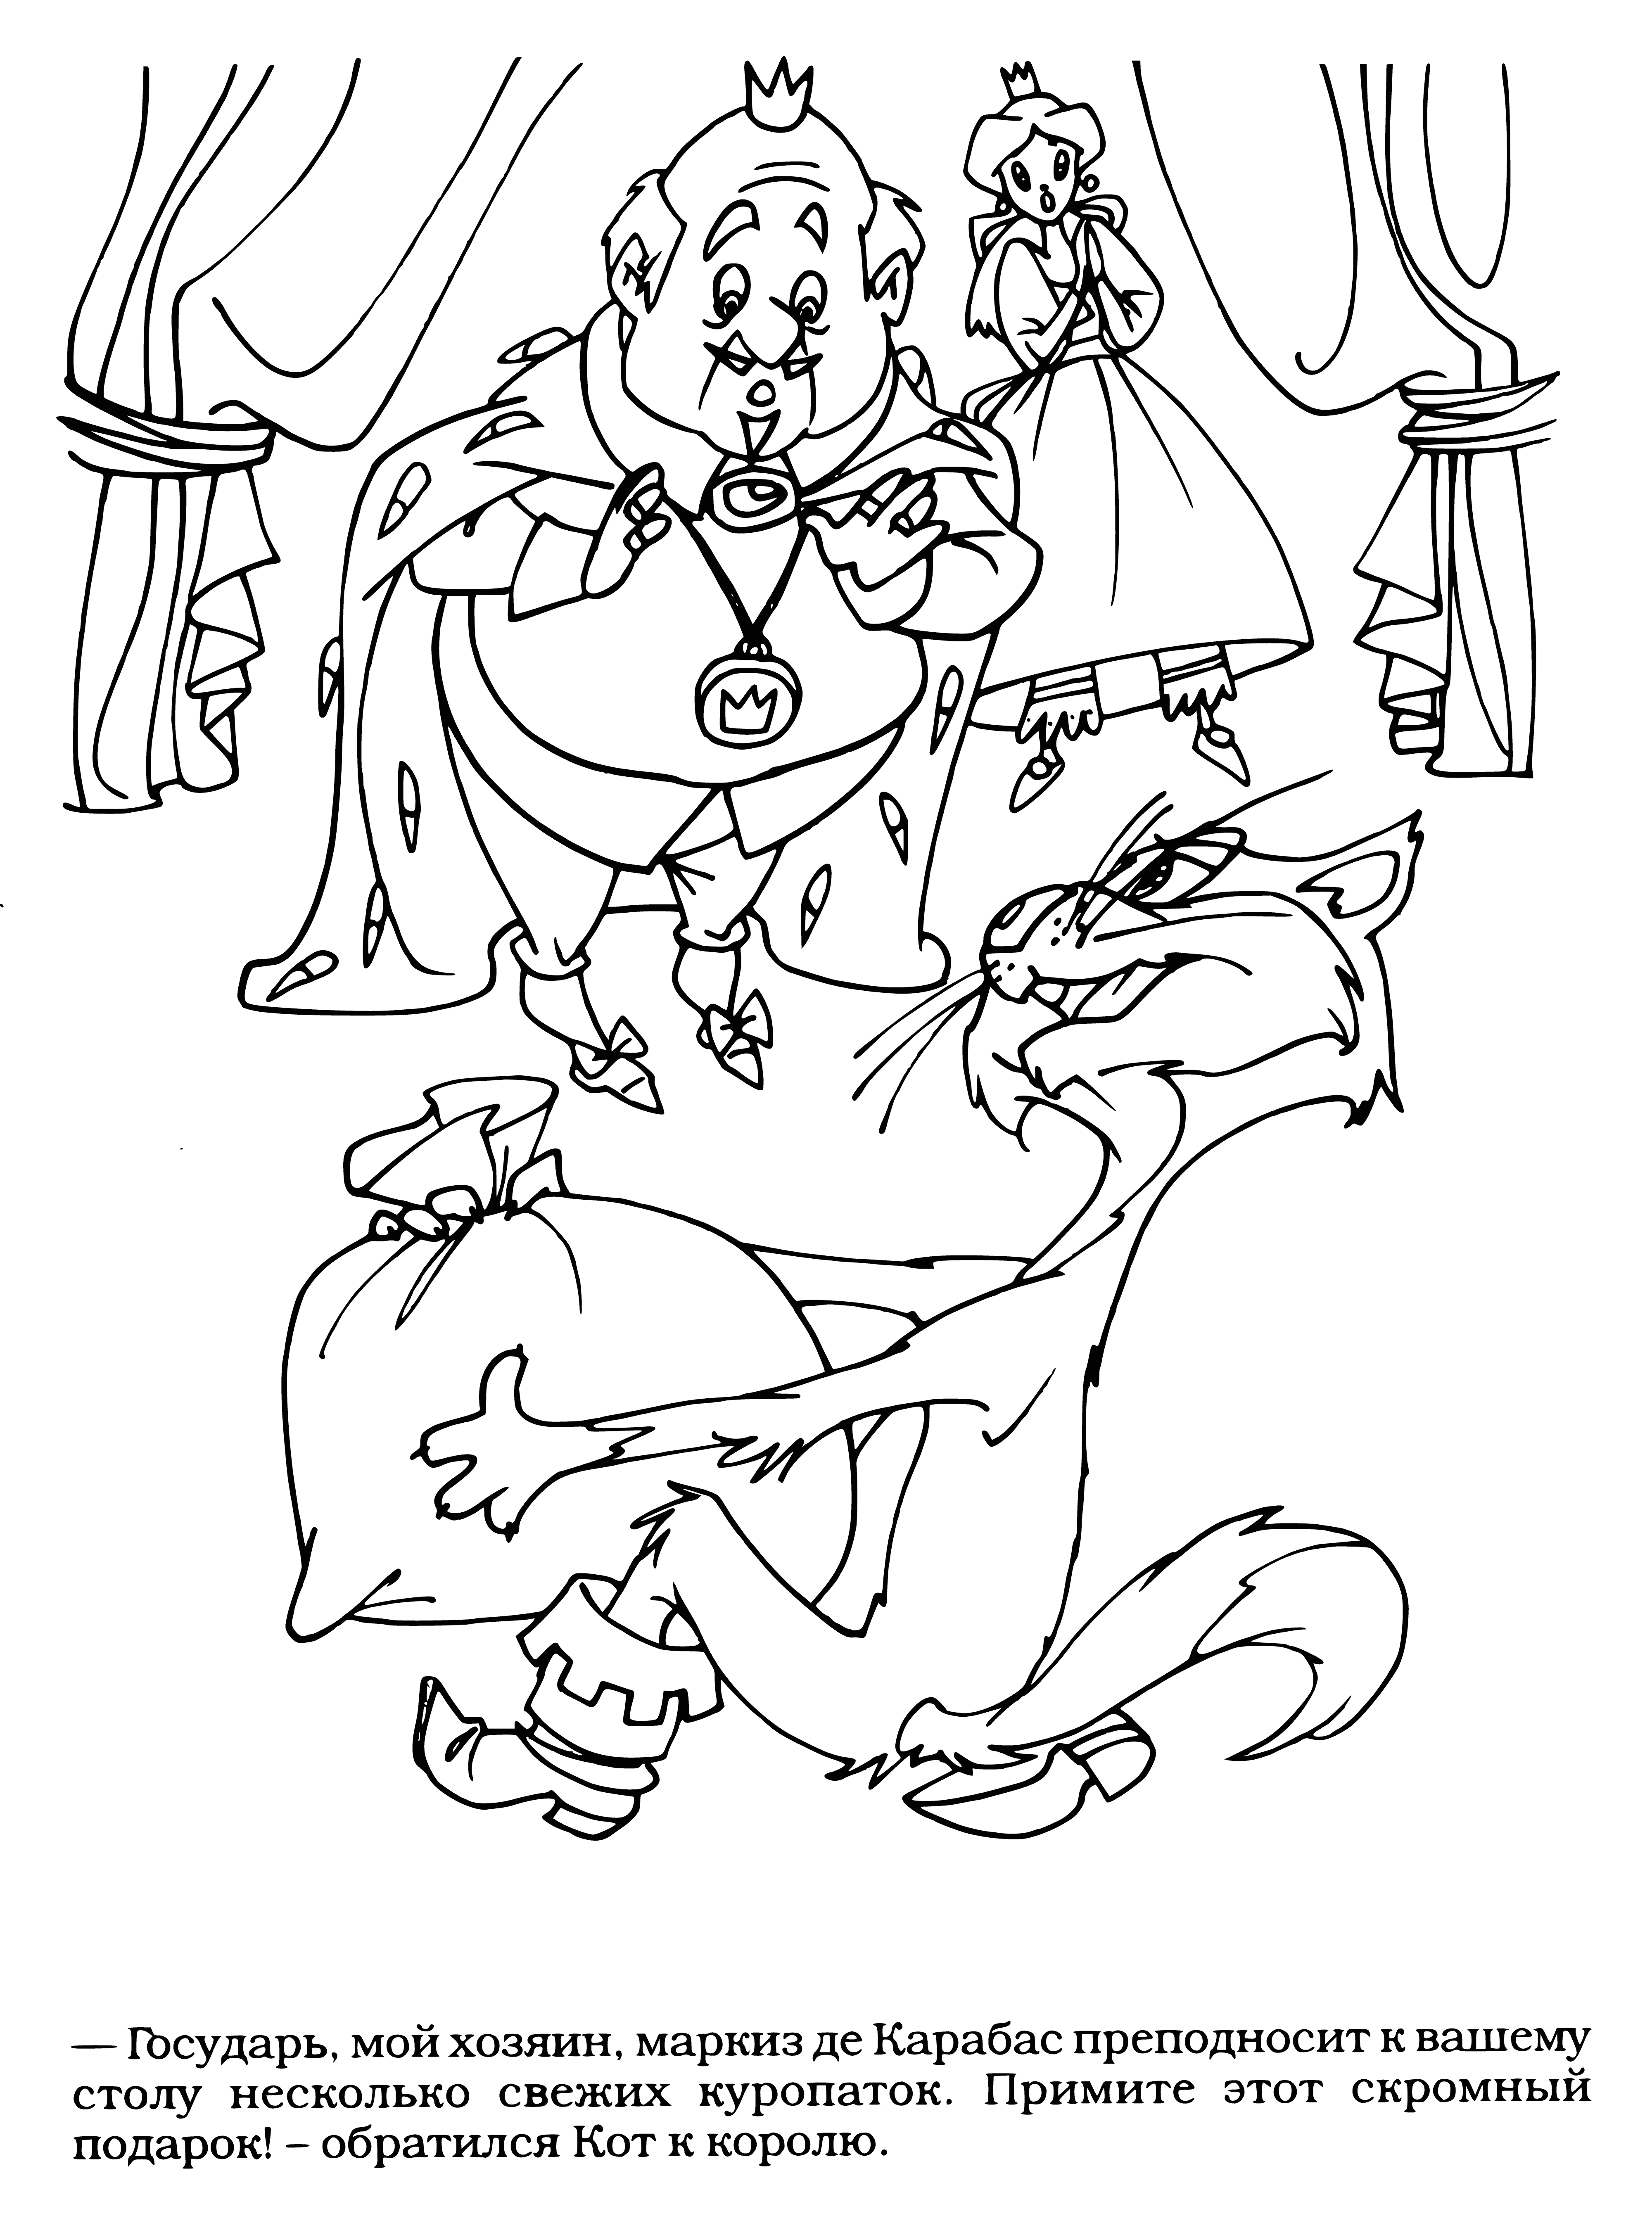 Partridge in a bag coloring page